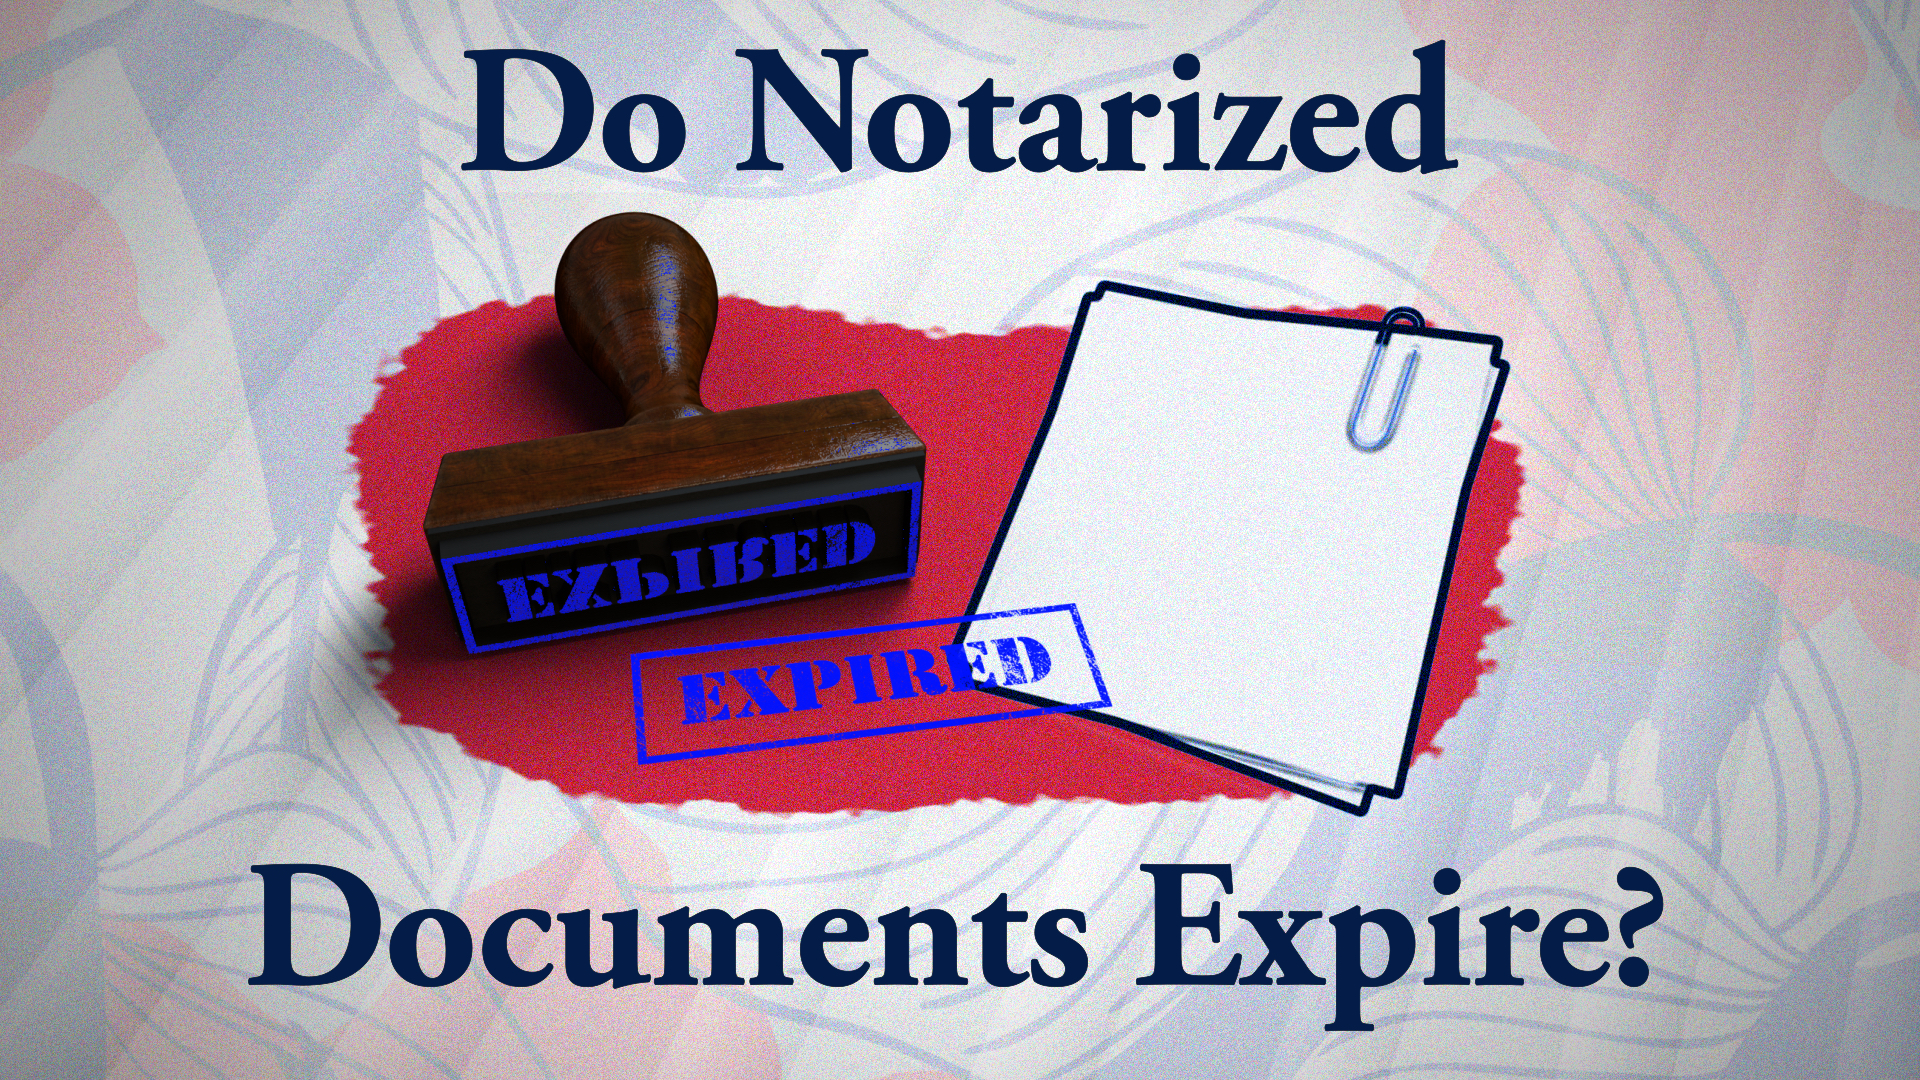 Can a Notary accept an expired ID?